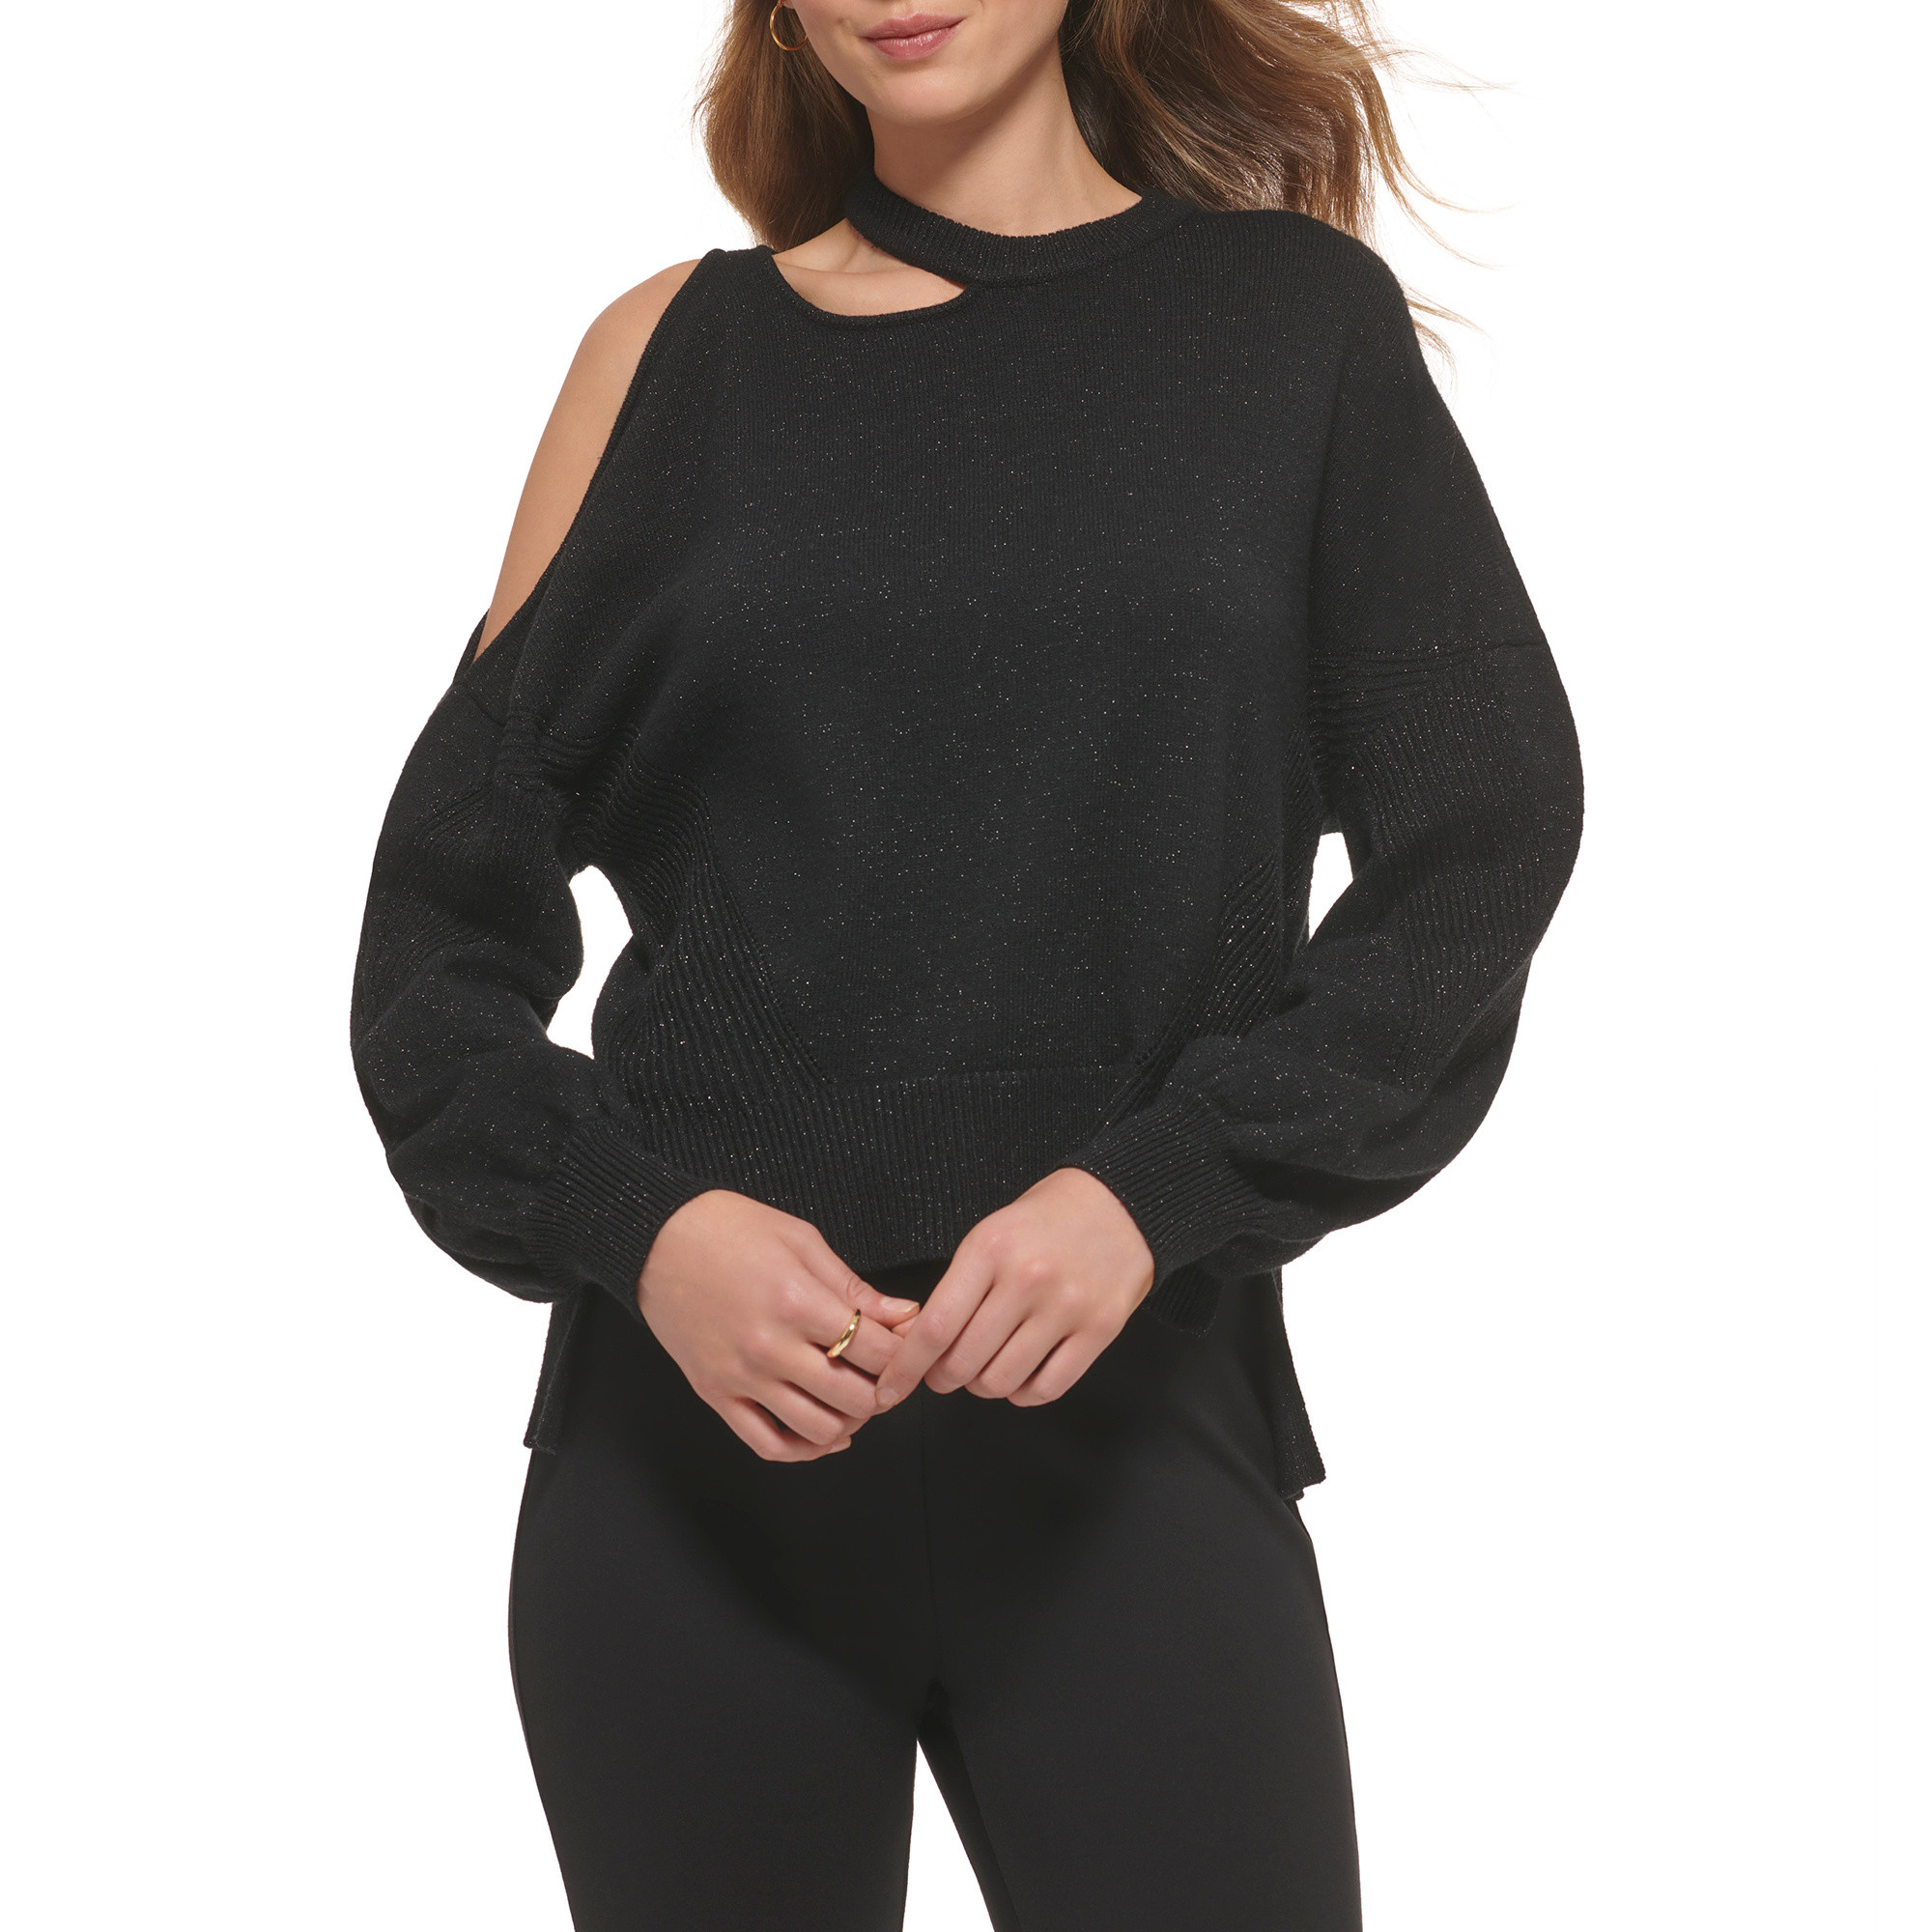 DKNY - Sweater with cut out details, Black, large image number 2